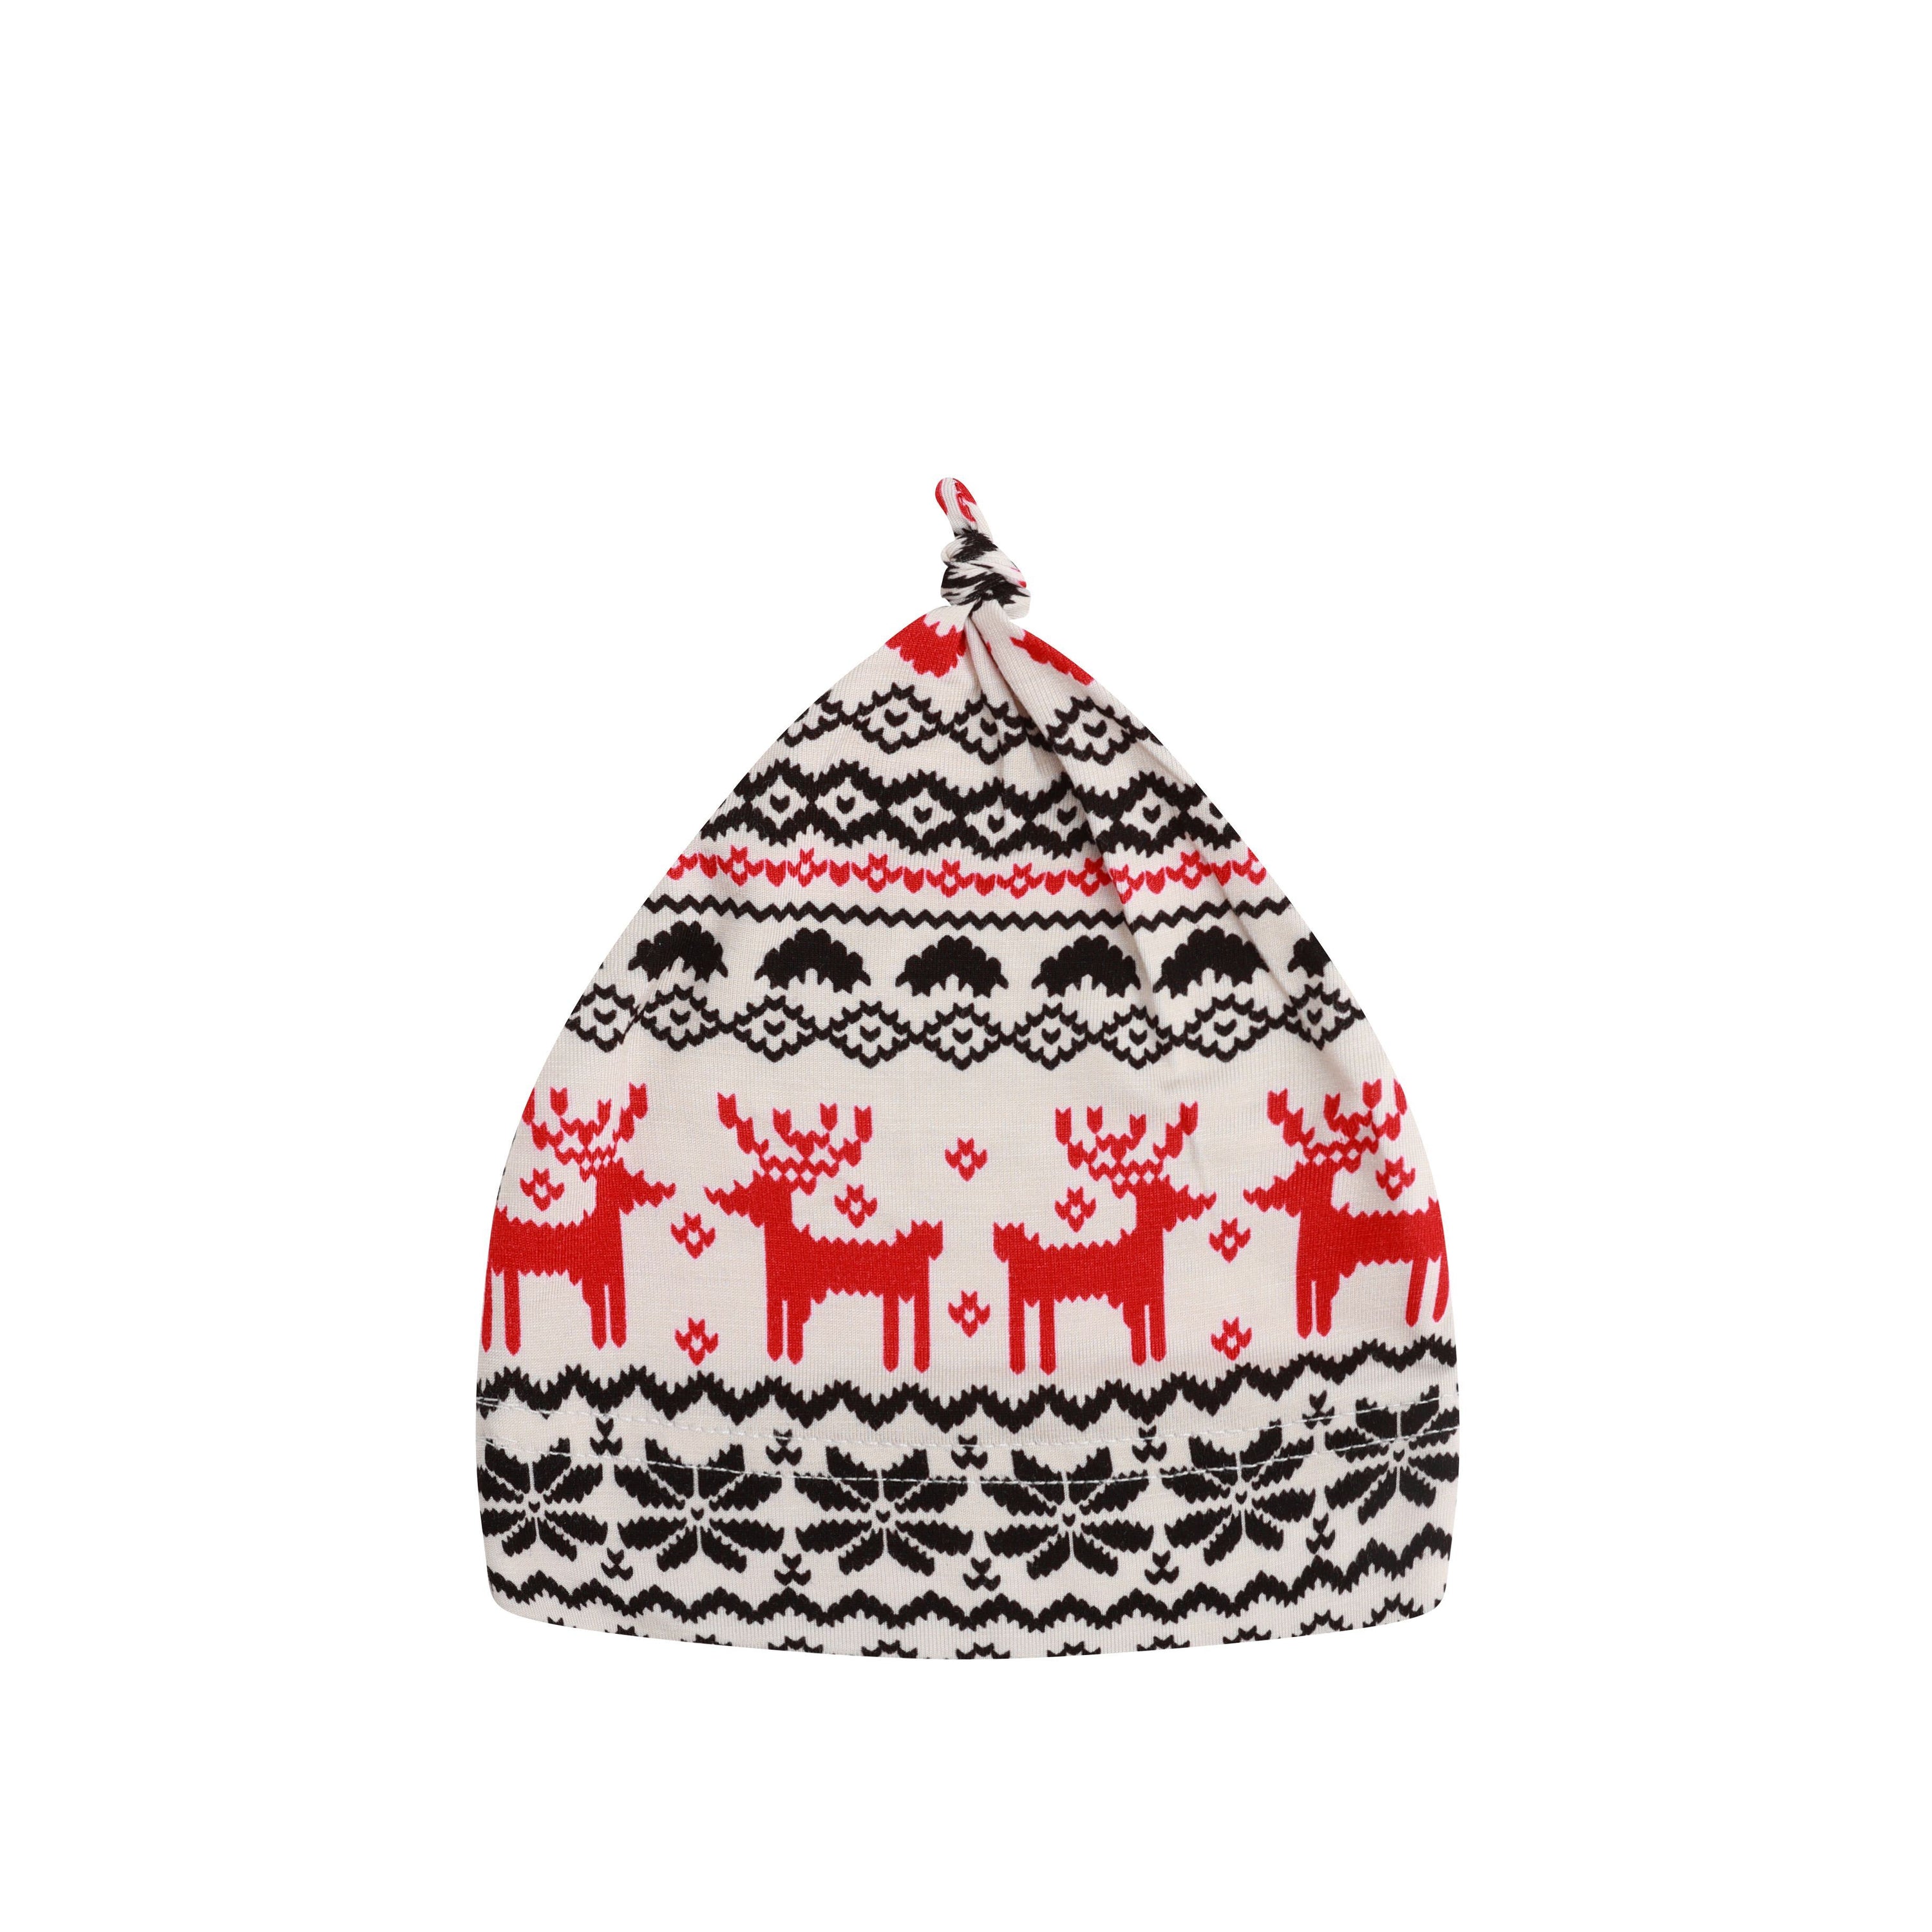 Baby Swaddle & Hat Set  Holiday Edition